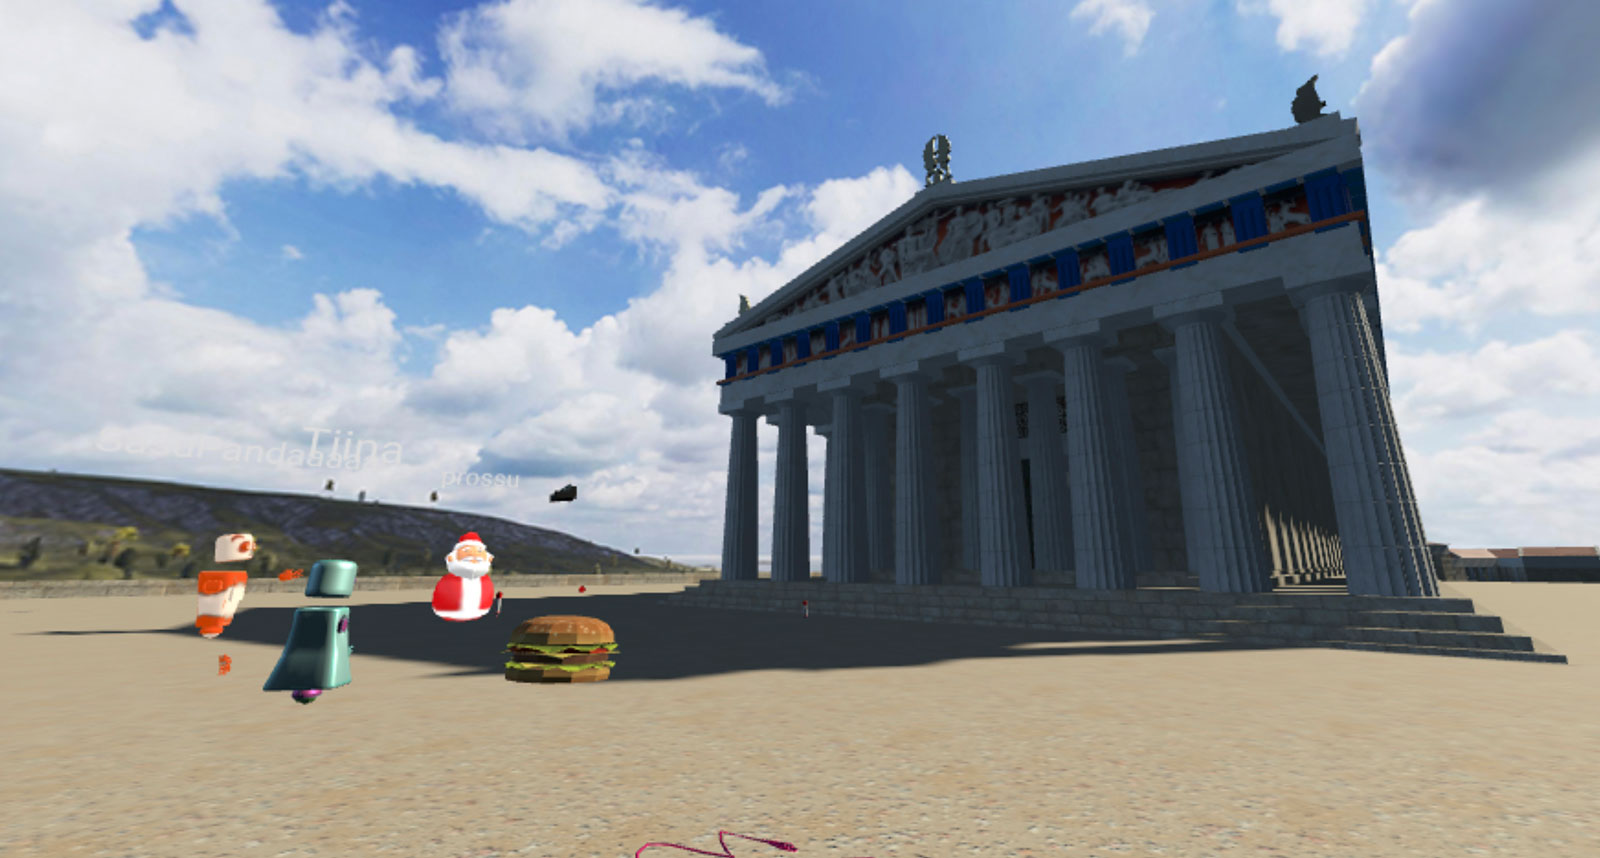 A screenshot from Mozilla Hubs virtual environment. A Santa Claus, robot and panda avatars are standing in front of a reconstructed Parthenon in a desert.